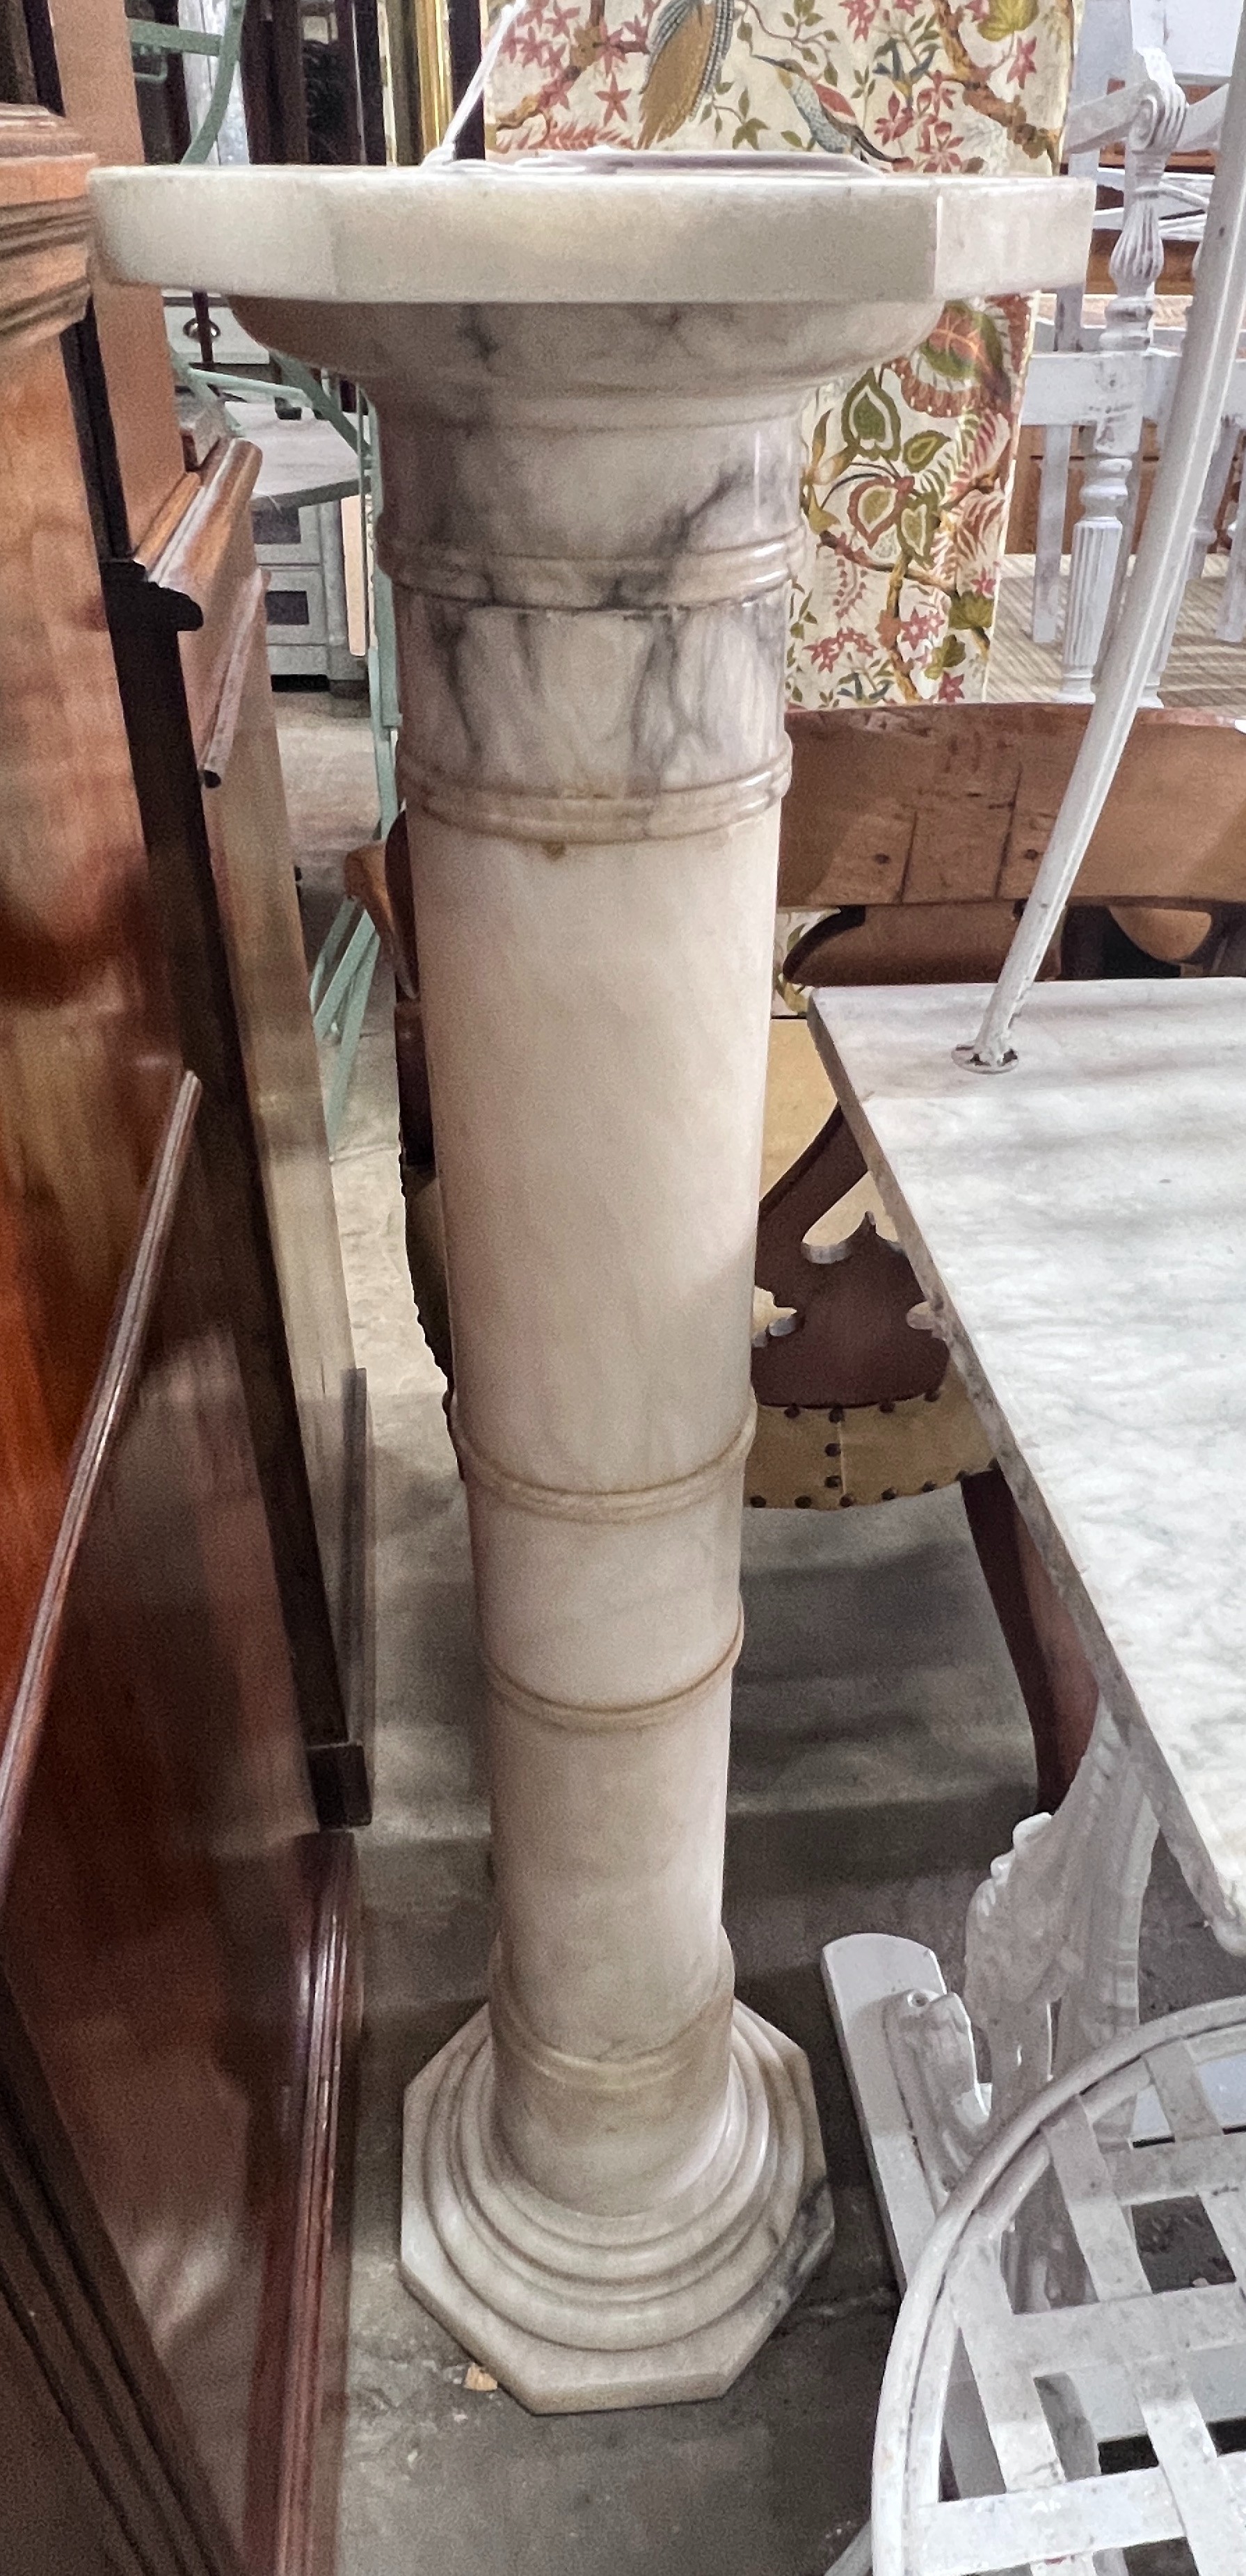 An alabaster sectional pedestal with octagonal top, height 106cm